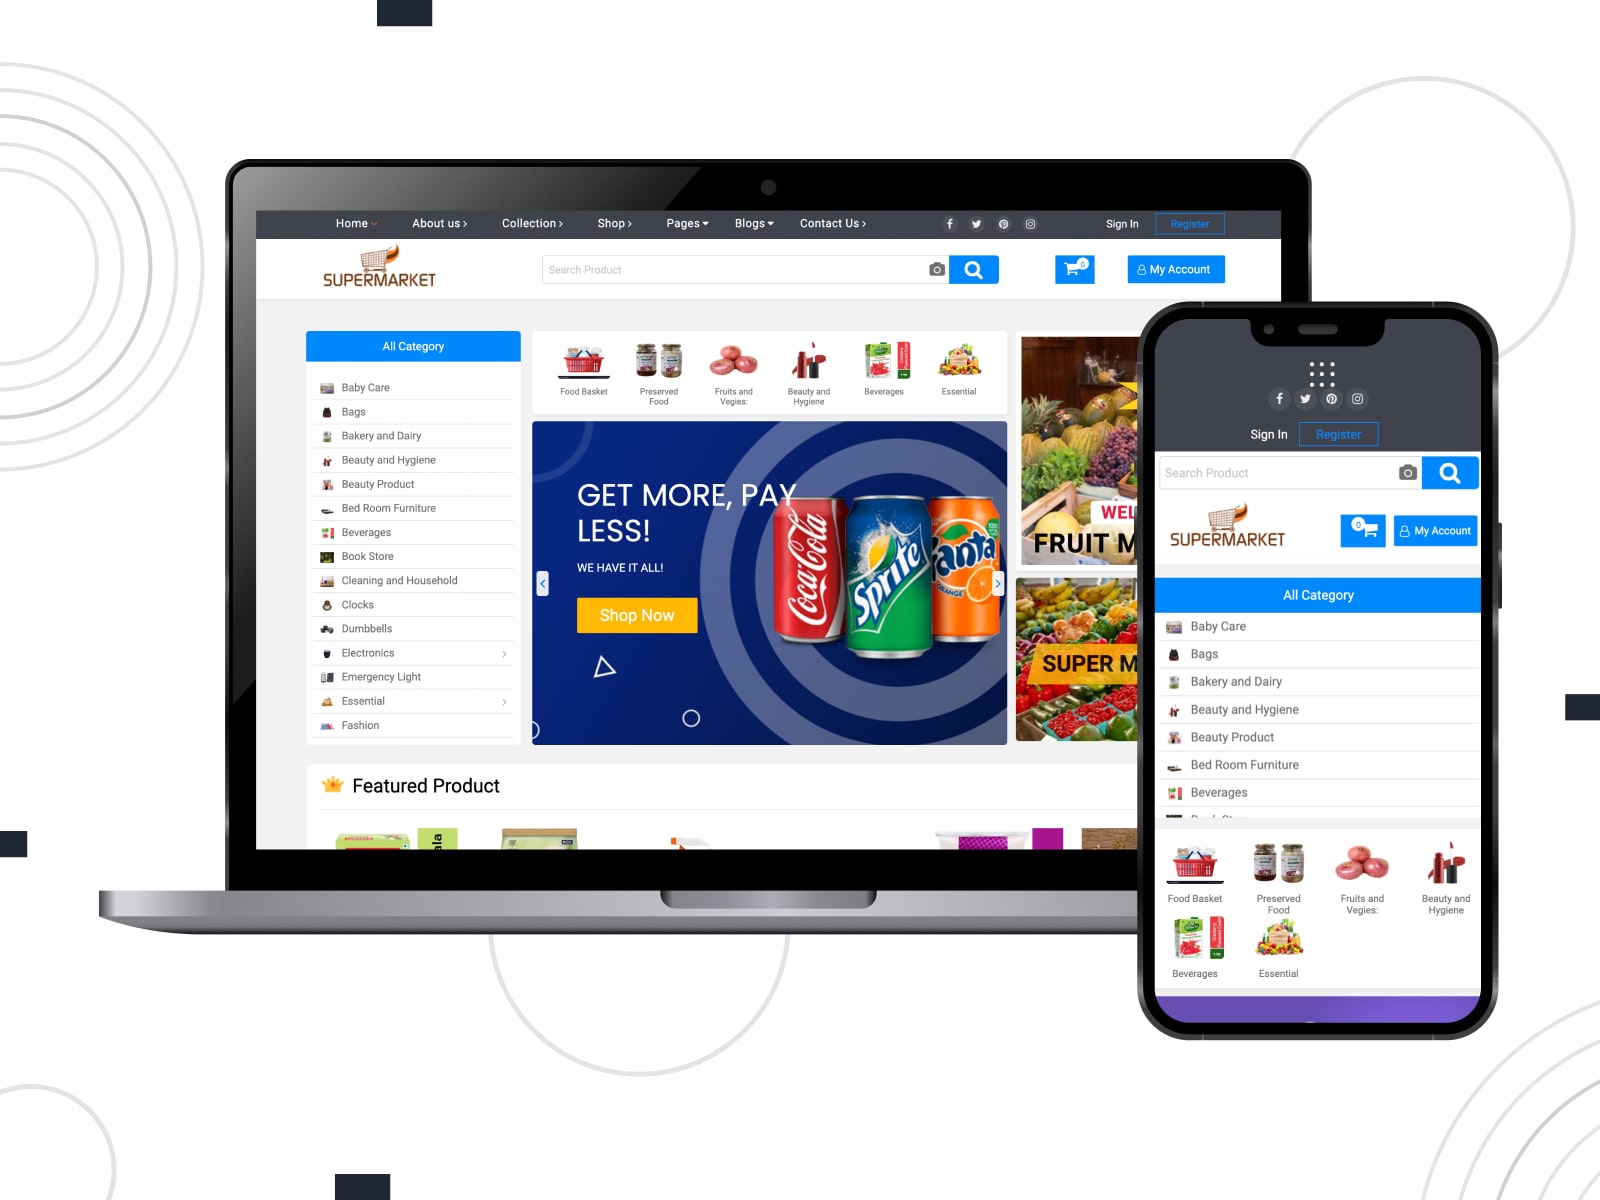 Image of Supermarket Ecommerce Store, a free WordPress theme for eCommerce with diverse sections for the latest and trending products.